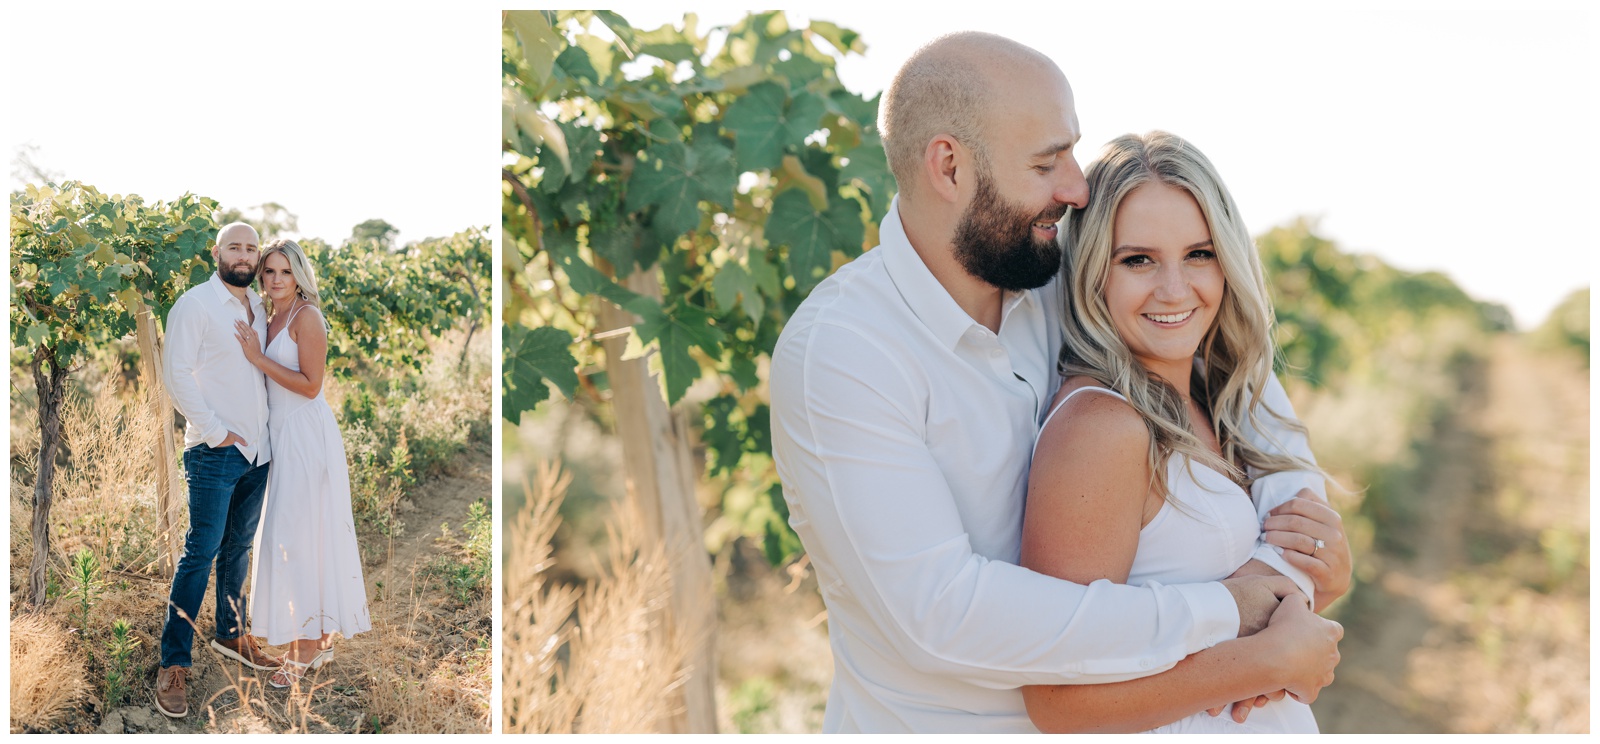 Quincy Cellars Vineyard Engagement Session